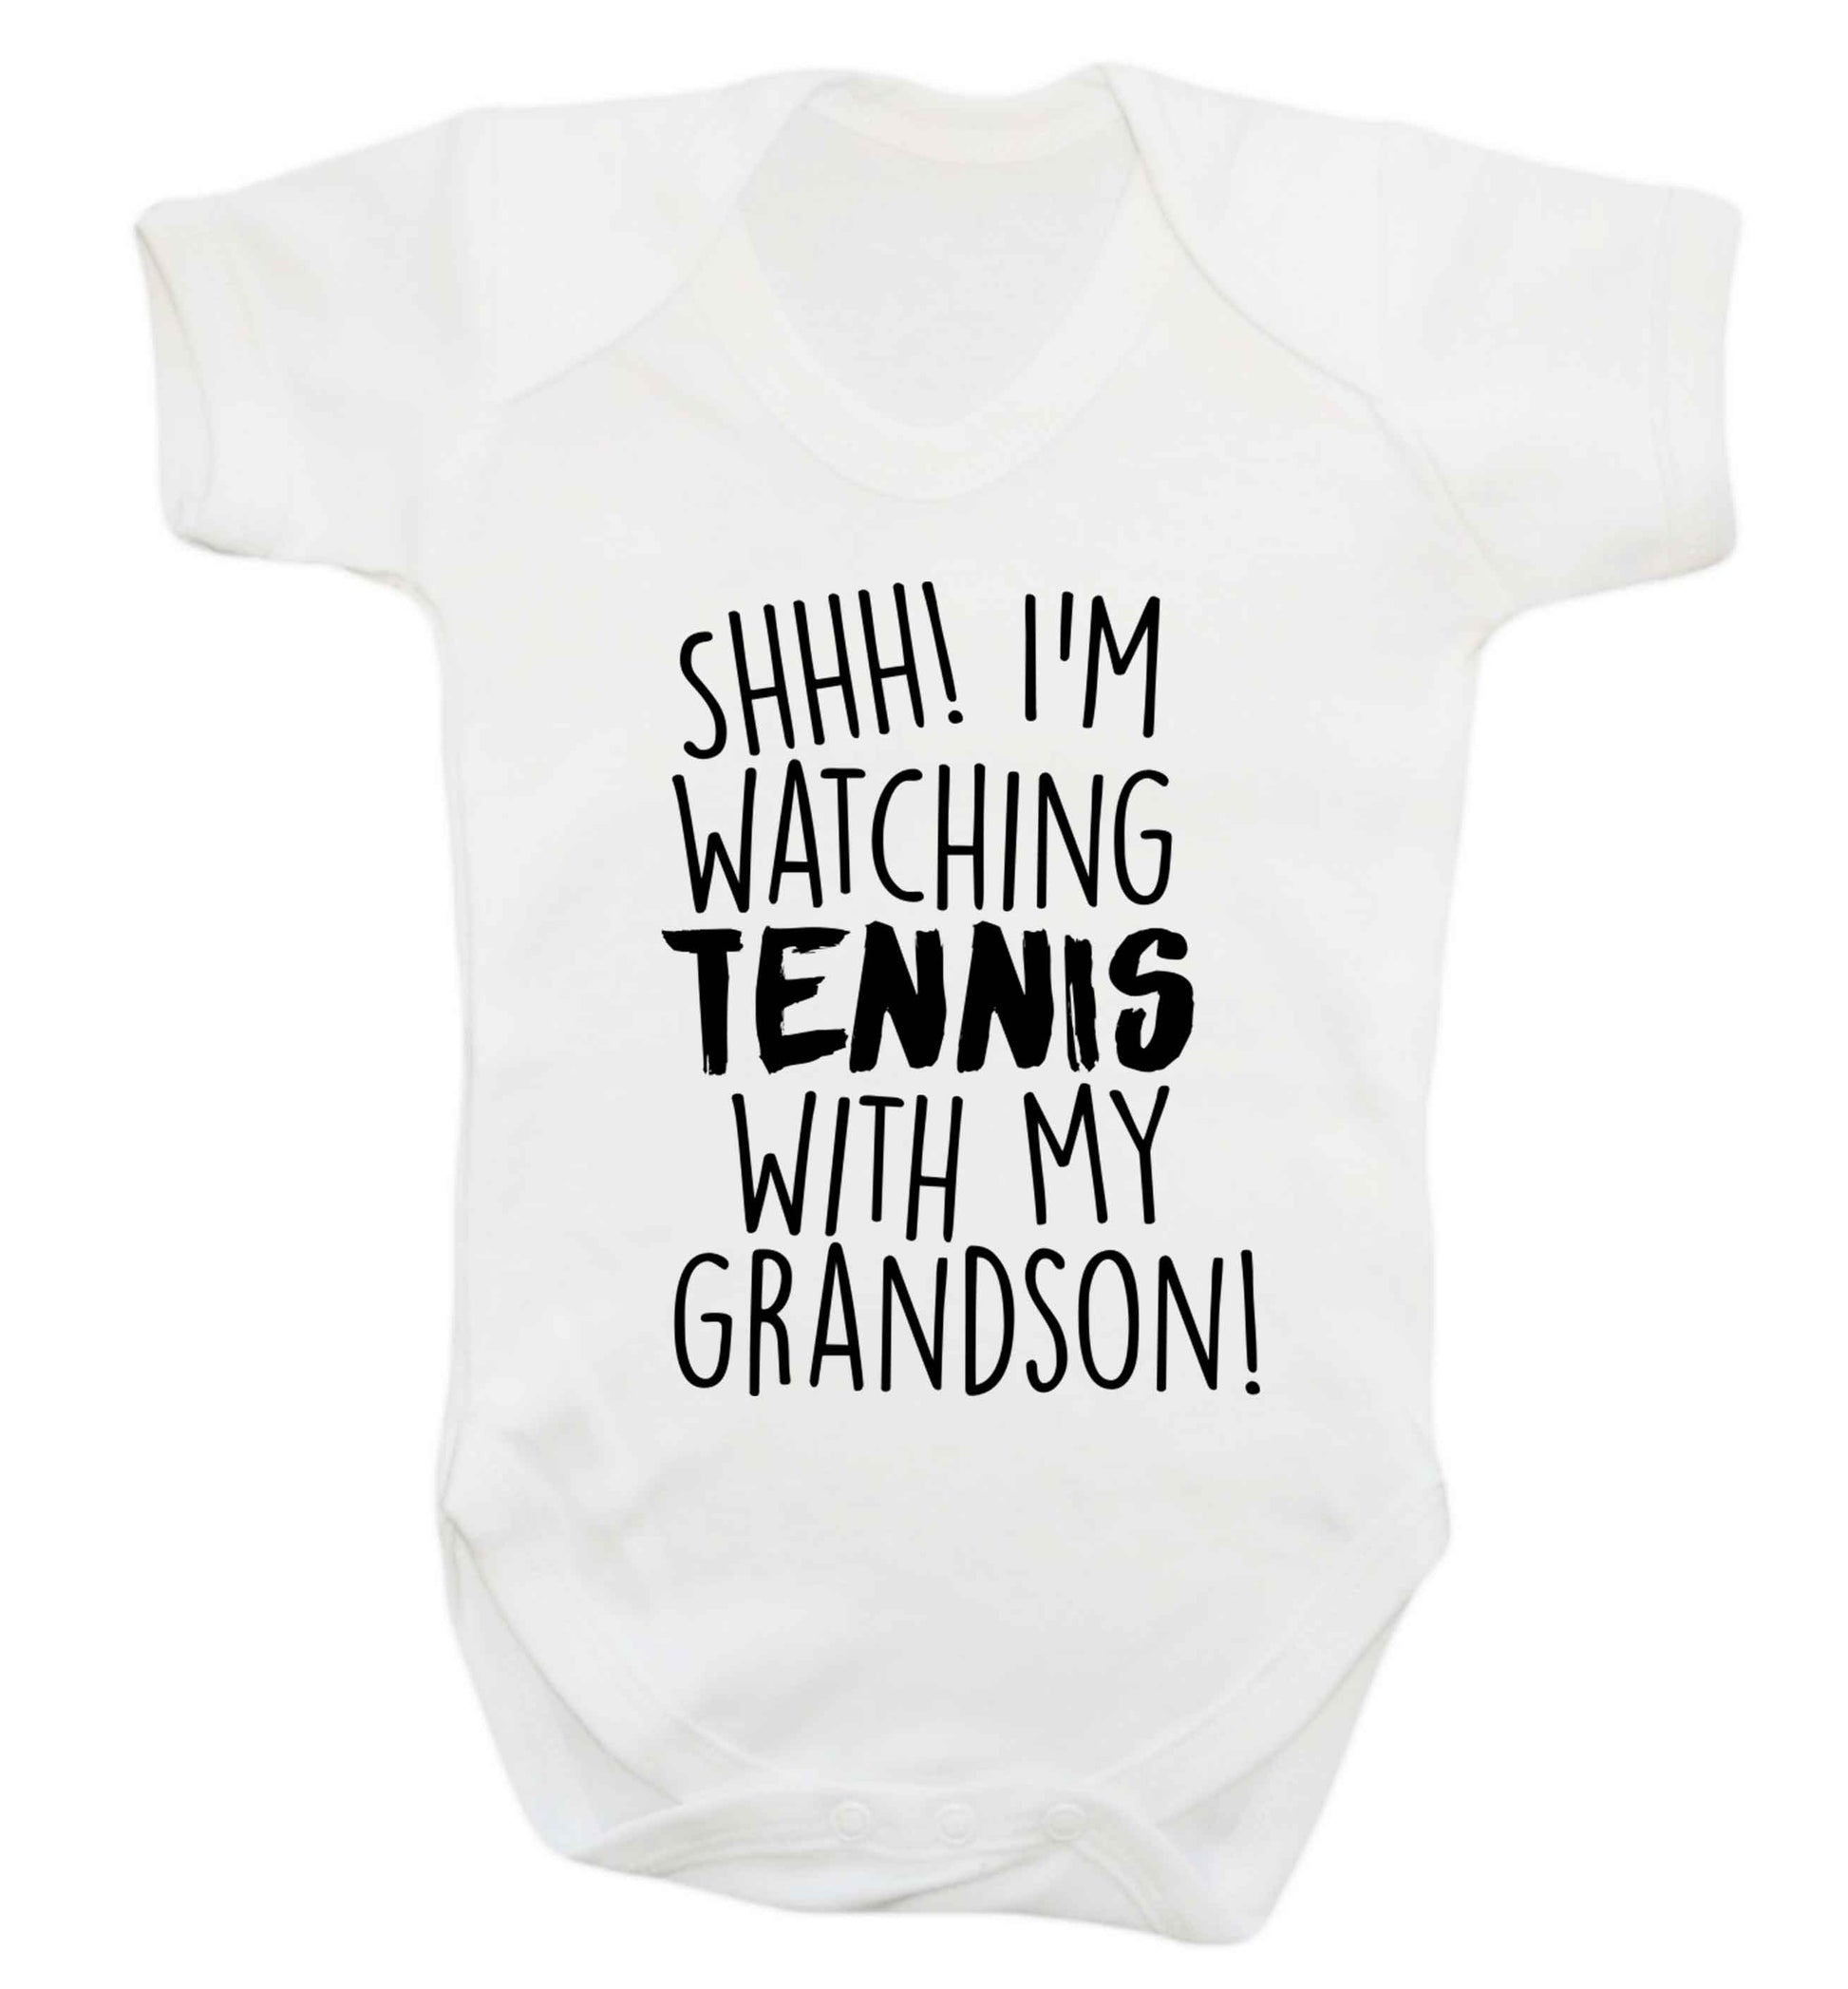 Shh! I'm watching tennis with my grandson! Baby Vest white 18-24 months